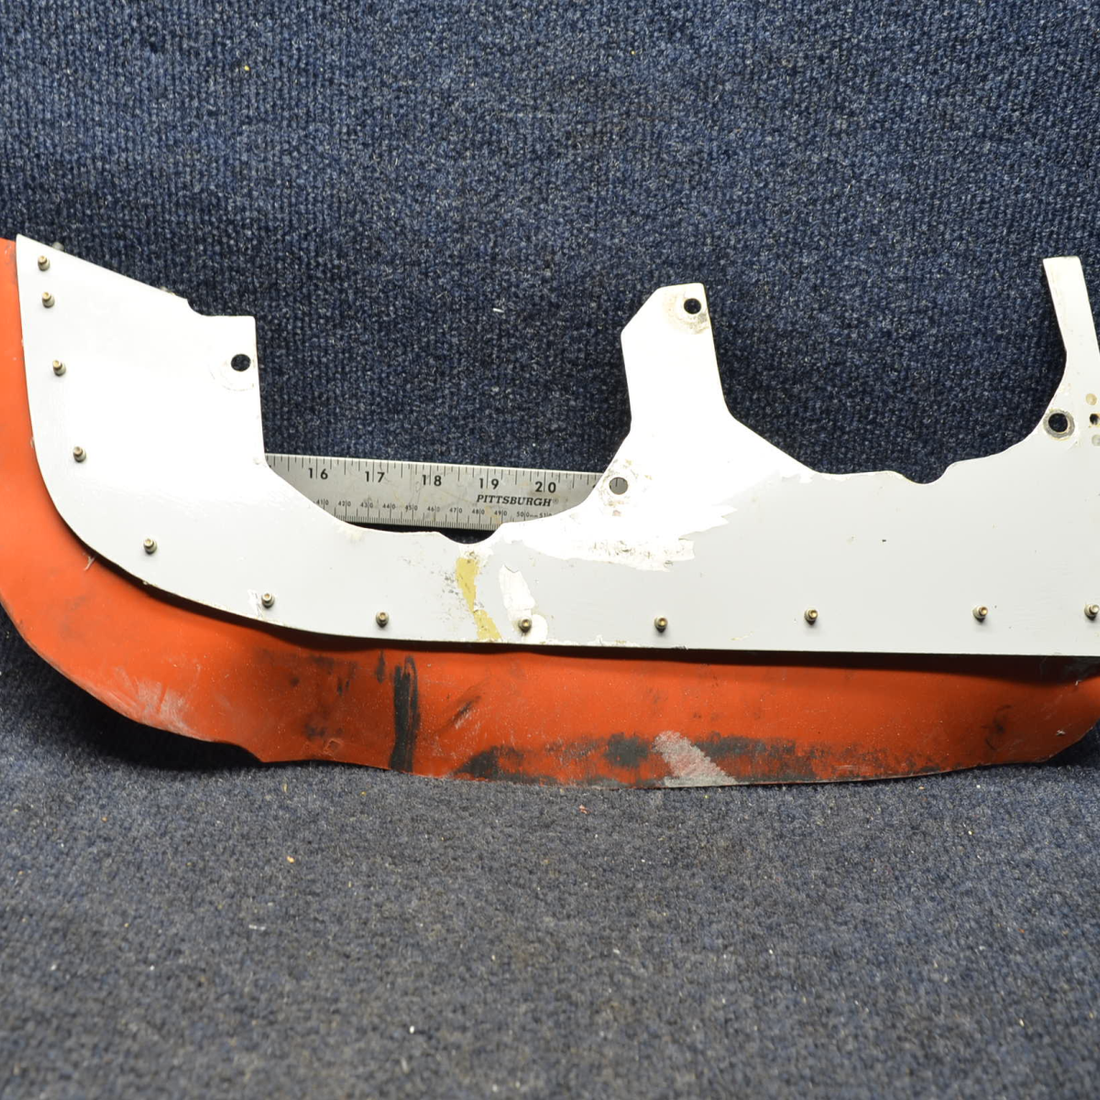 Used aircraft parts for sale, 502019-1 PIPER- CESSNA-BEECH- MOONEY VARIOS GRUMMAN LH SIDE BAFFLE